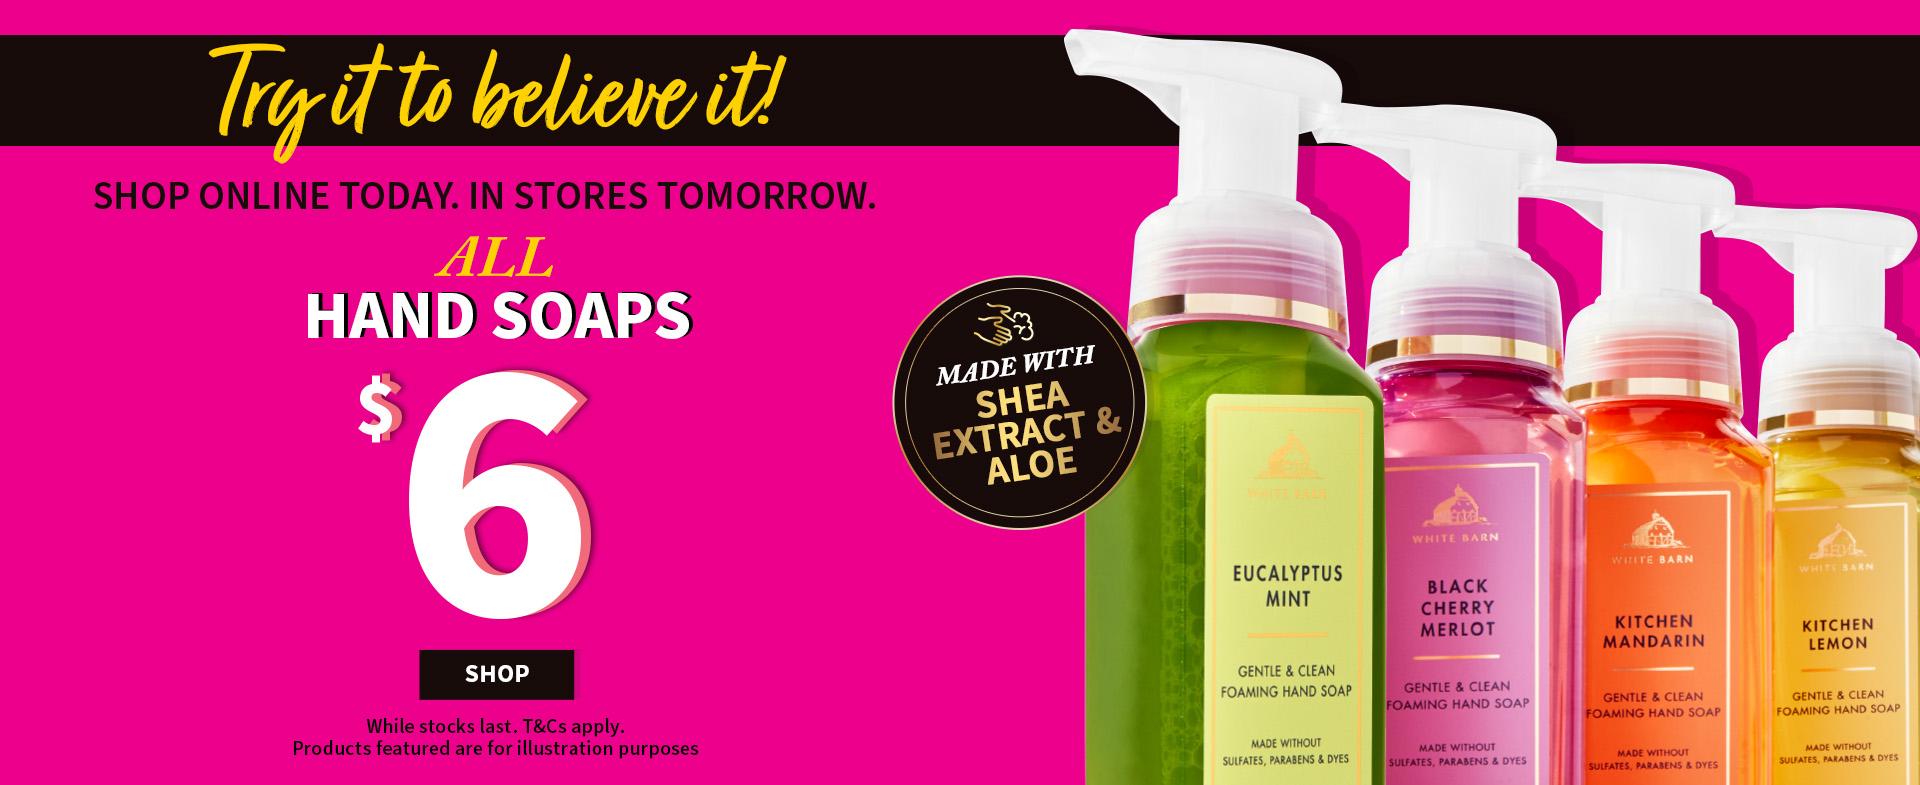 TRY IT TO BELIEVE IT SHOP ONLINE TODAY. IN STORE TOMORROW. ALL HAND SOAPS $